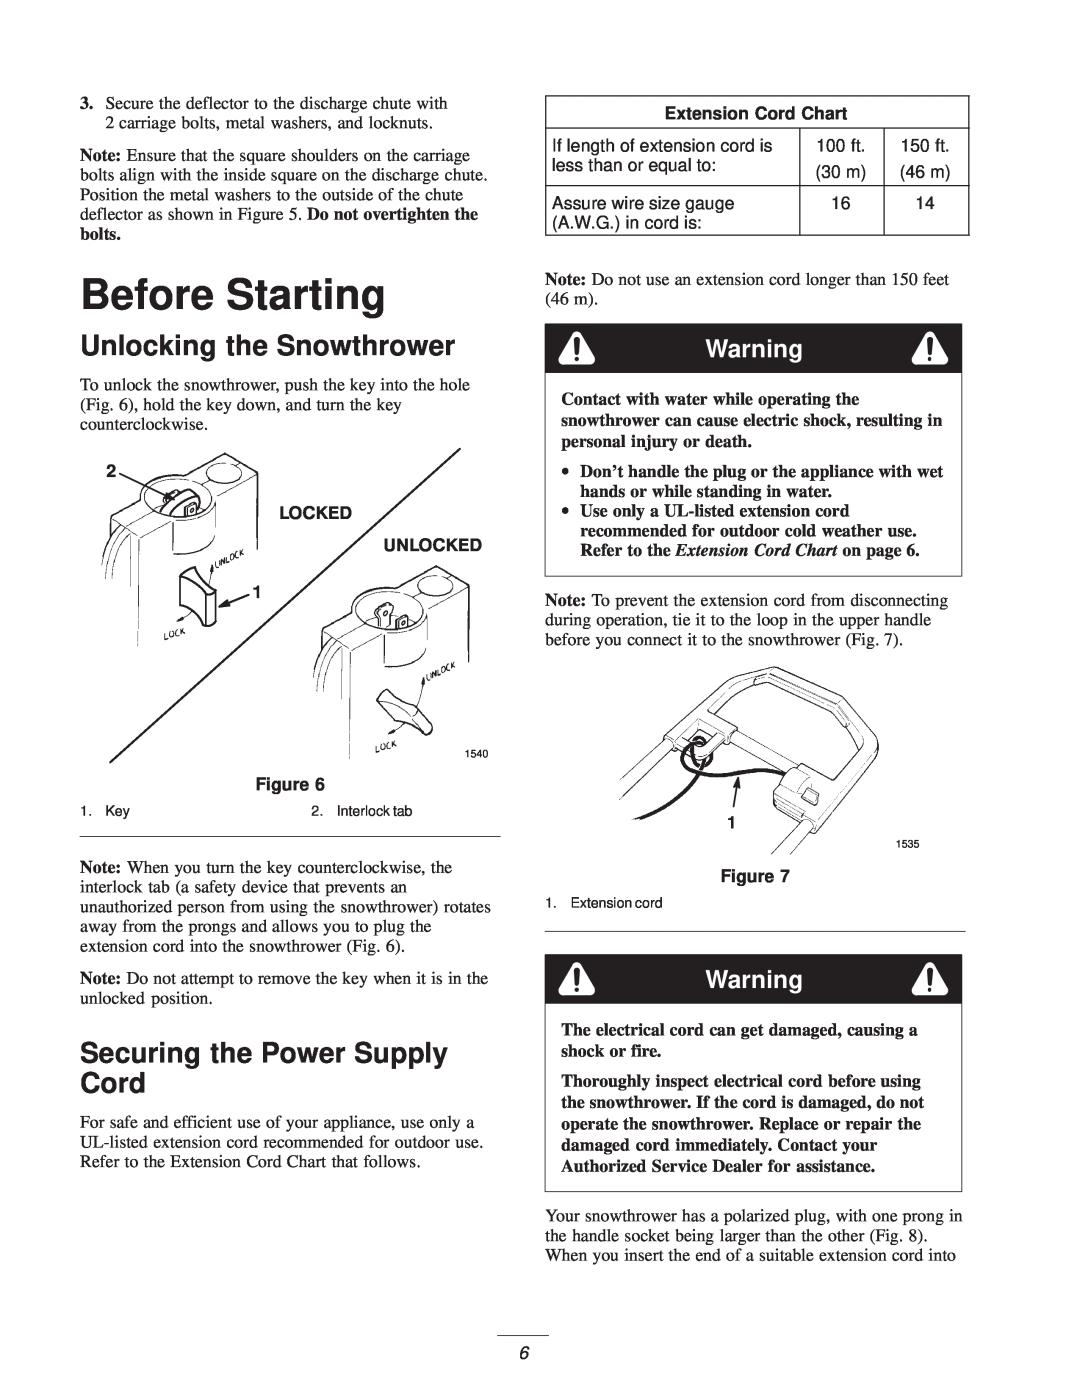 Toro 3.80E+13 manual Before Starting, Unlocking the Snowthrower, Securing the Power Supply Cord, Extension Cord Chart 